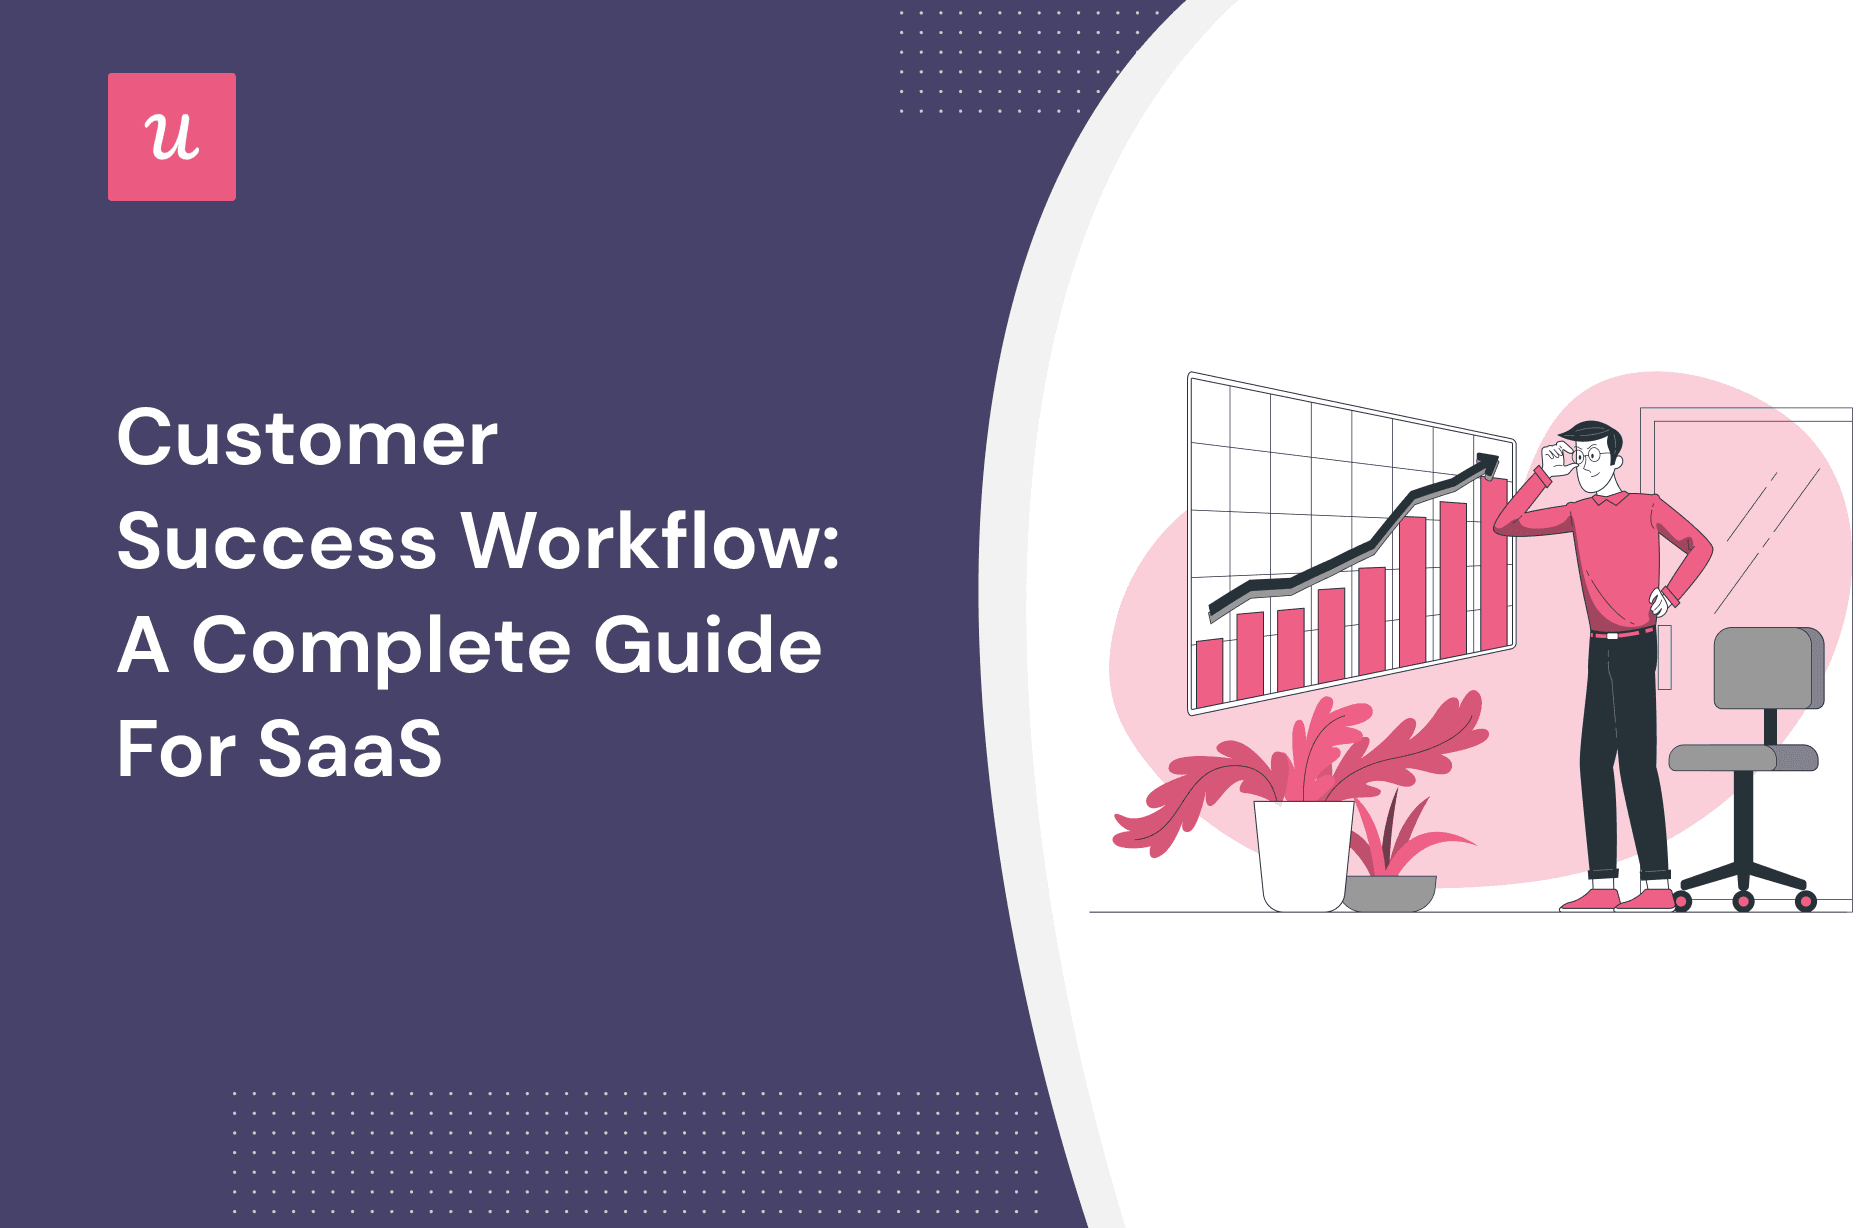 Customer Success Workflow: A Complete Guide for SaaS cover